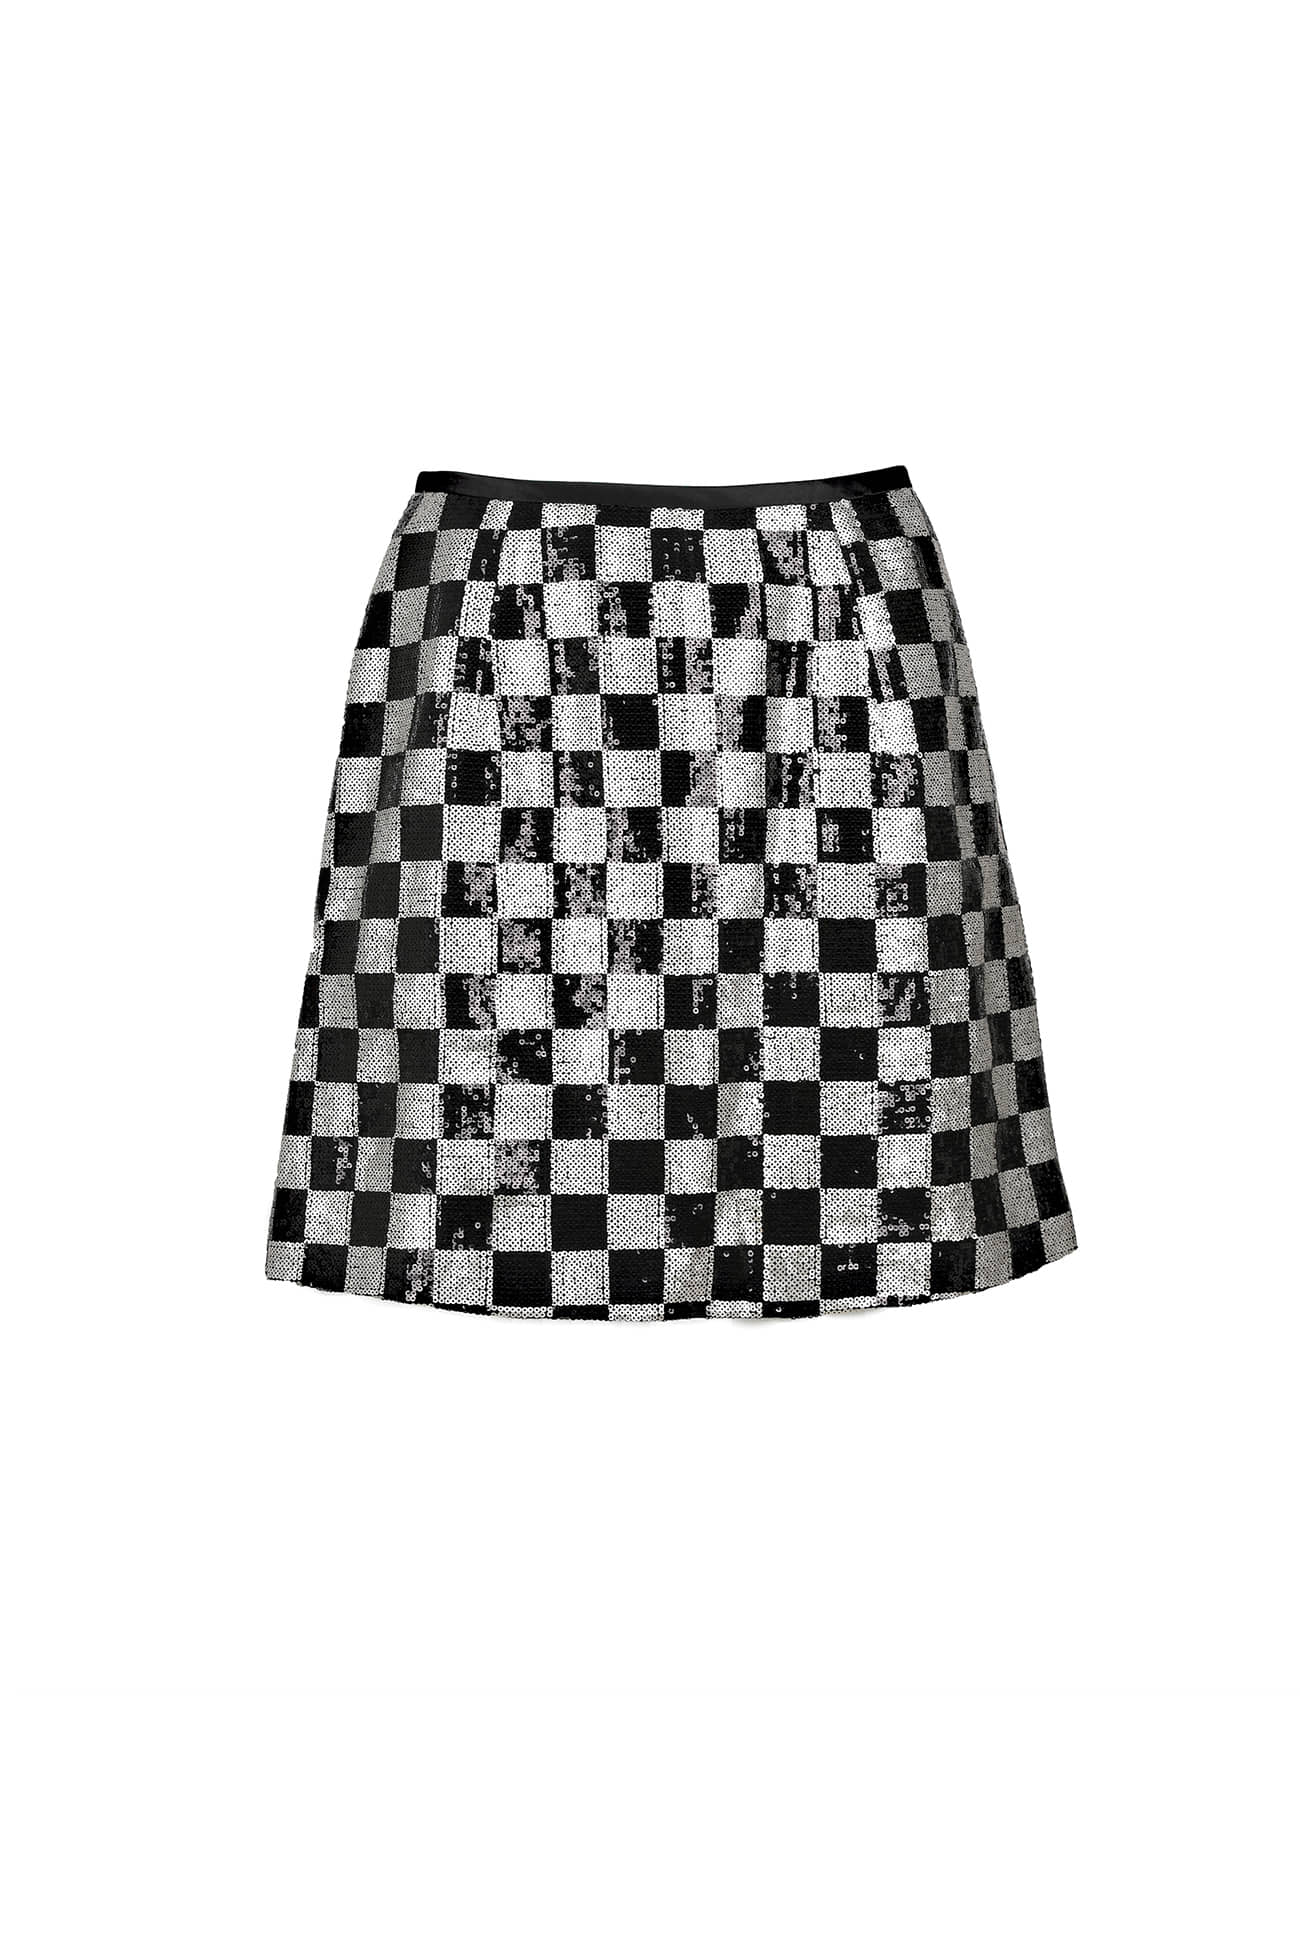 HIGH QUALITY LINE - Chessboard Sequin Mini Skirts